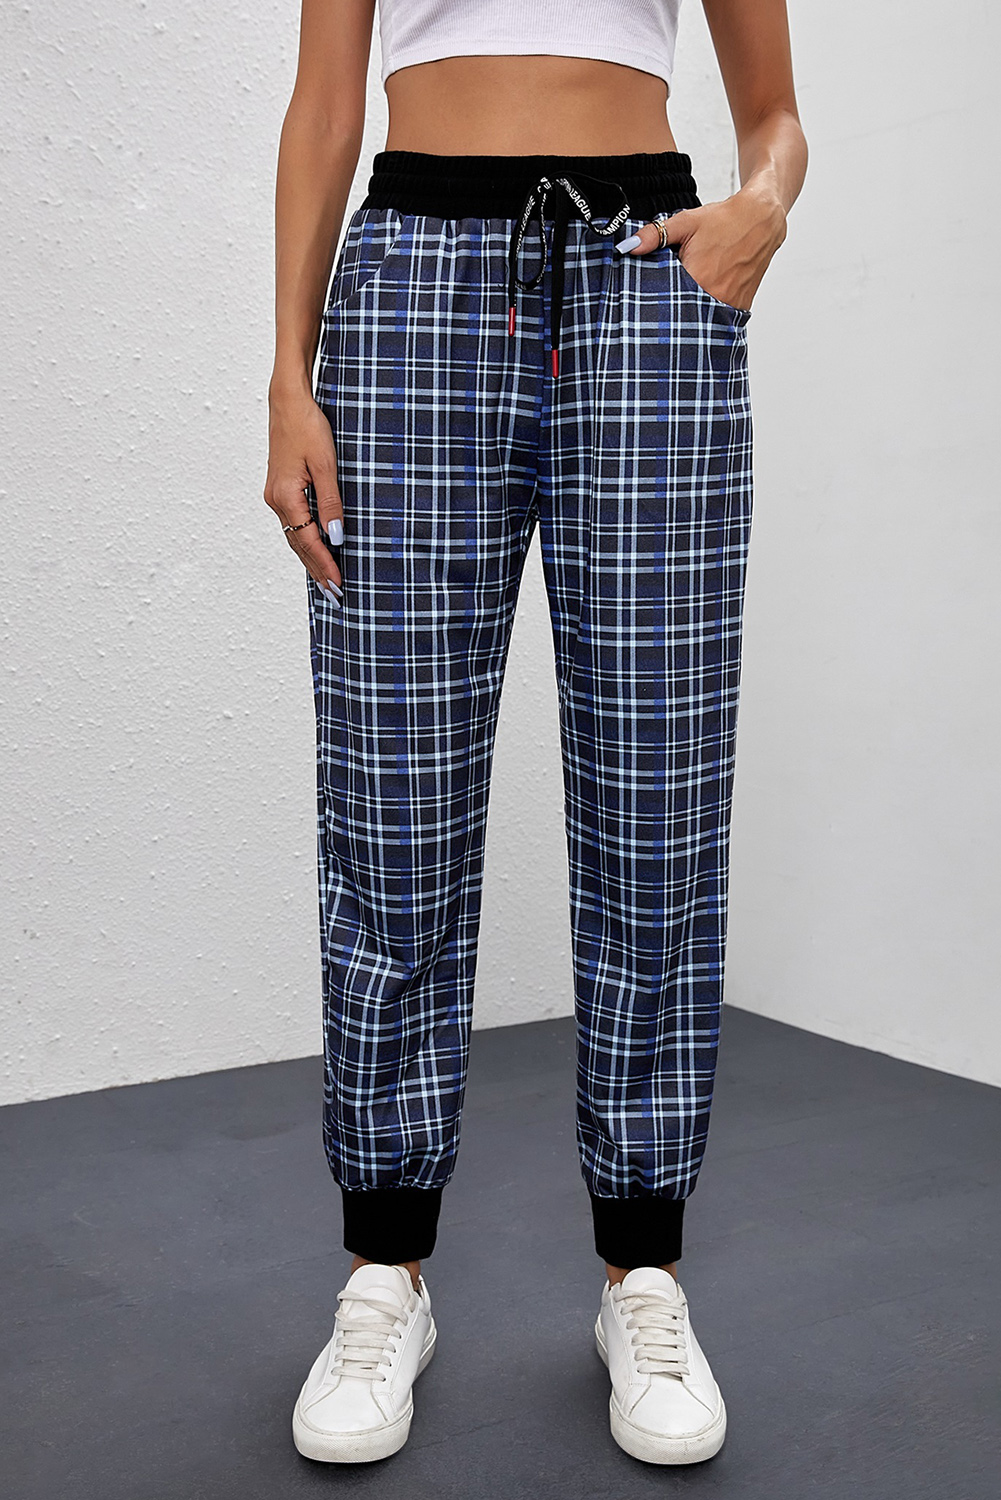 Stockpapa ladies High Waisted Drawstring Plaid Joggers Over Left 